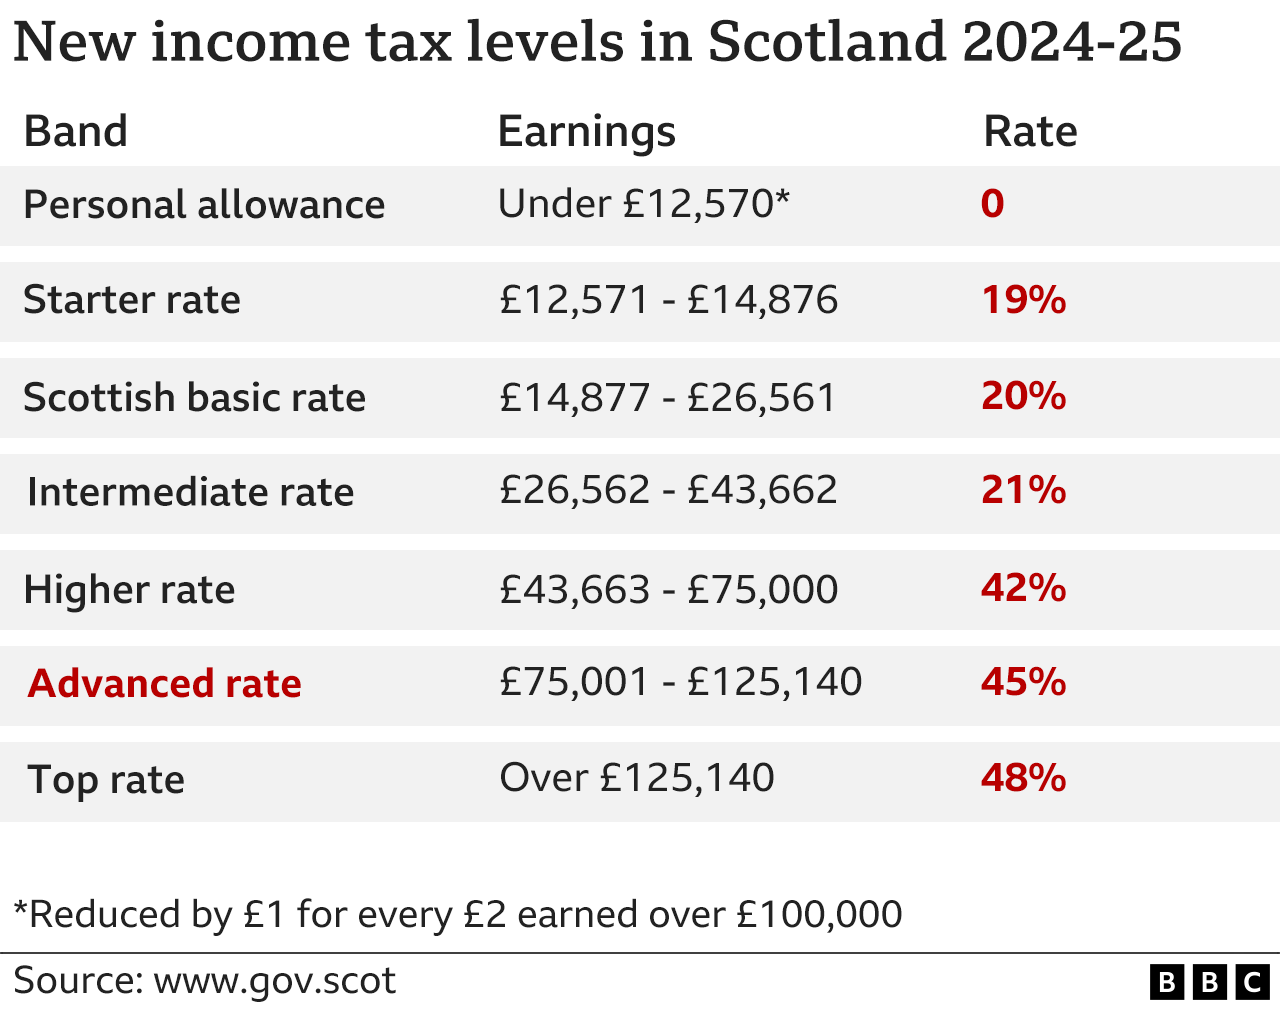 Table showing new income tax bands in Scotland from 2024-25. Personal allowance means no tax will paid on the first £12,570. The new tax bands are: starter rate between £12,571 - £14,876 at 19%; basic rate between £14,877 - £26,56 at 20%; intermediate rate between £26,562 - £43,662 at 21%; higher rate between £43,663 - £75,000 at 42%; advanced rate between £75,001 - £125,140 at 45%; top rate is over £125,140 at 48%. Note people earning more than £100,000 will see their Personal Allowance reduced by £1 for every £2 earned over £100,000.